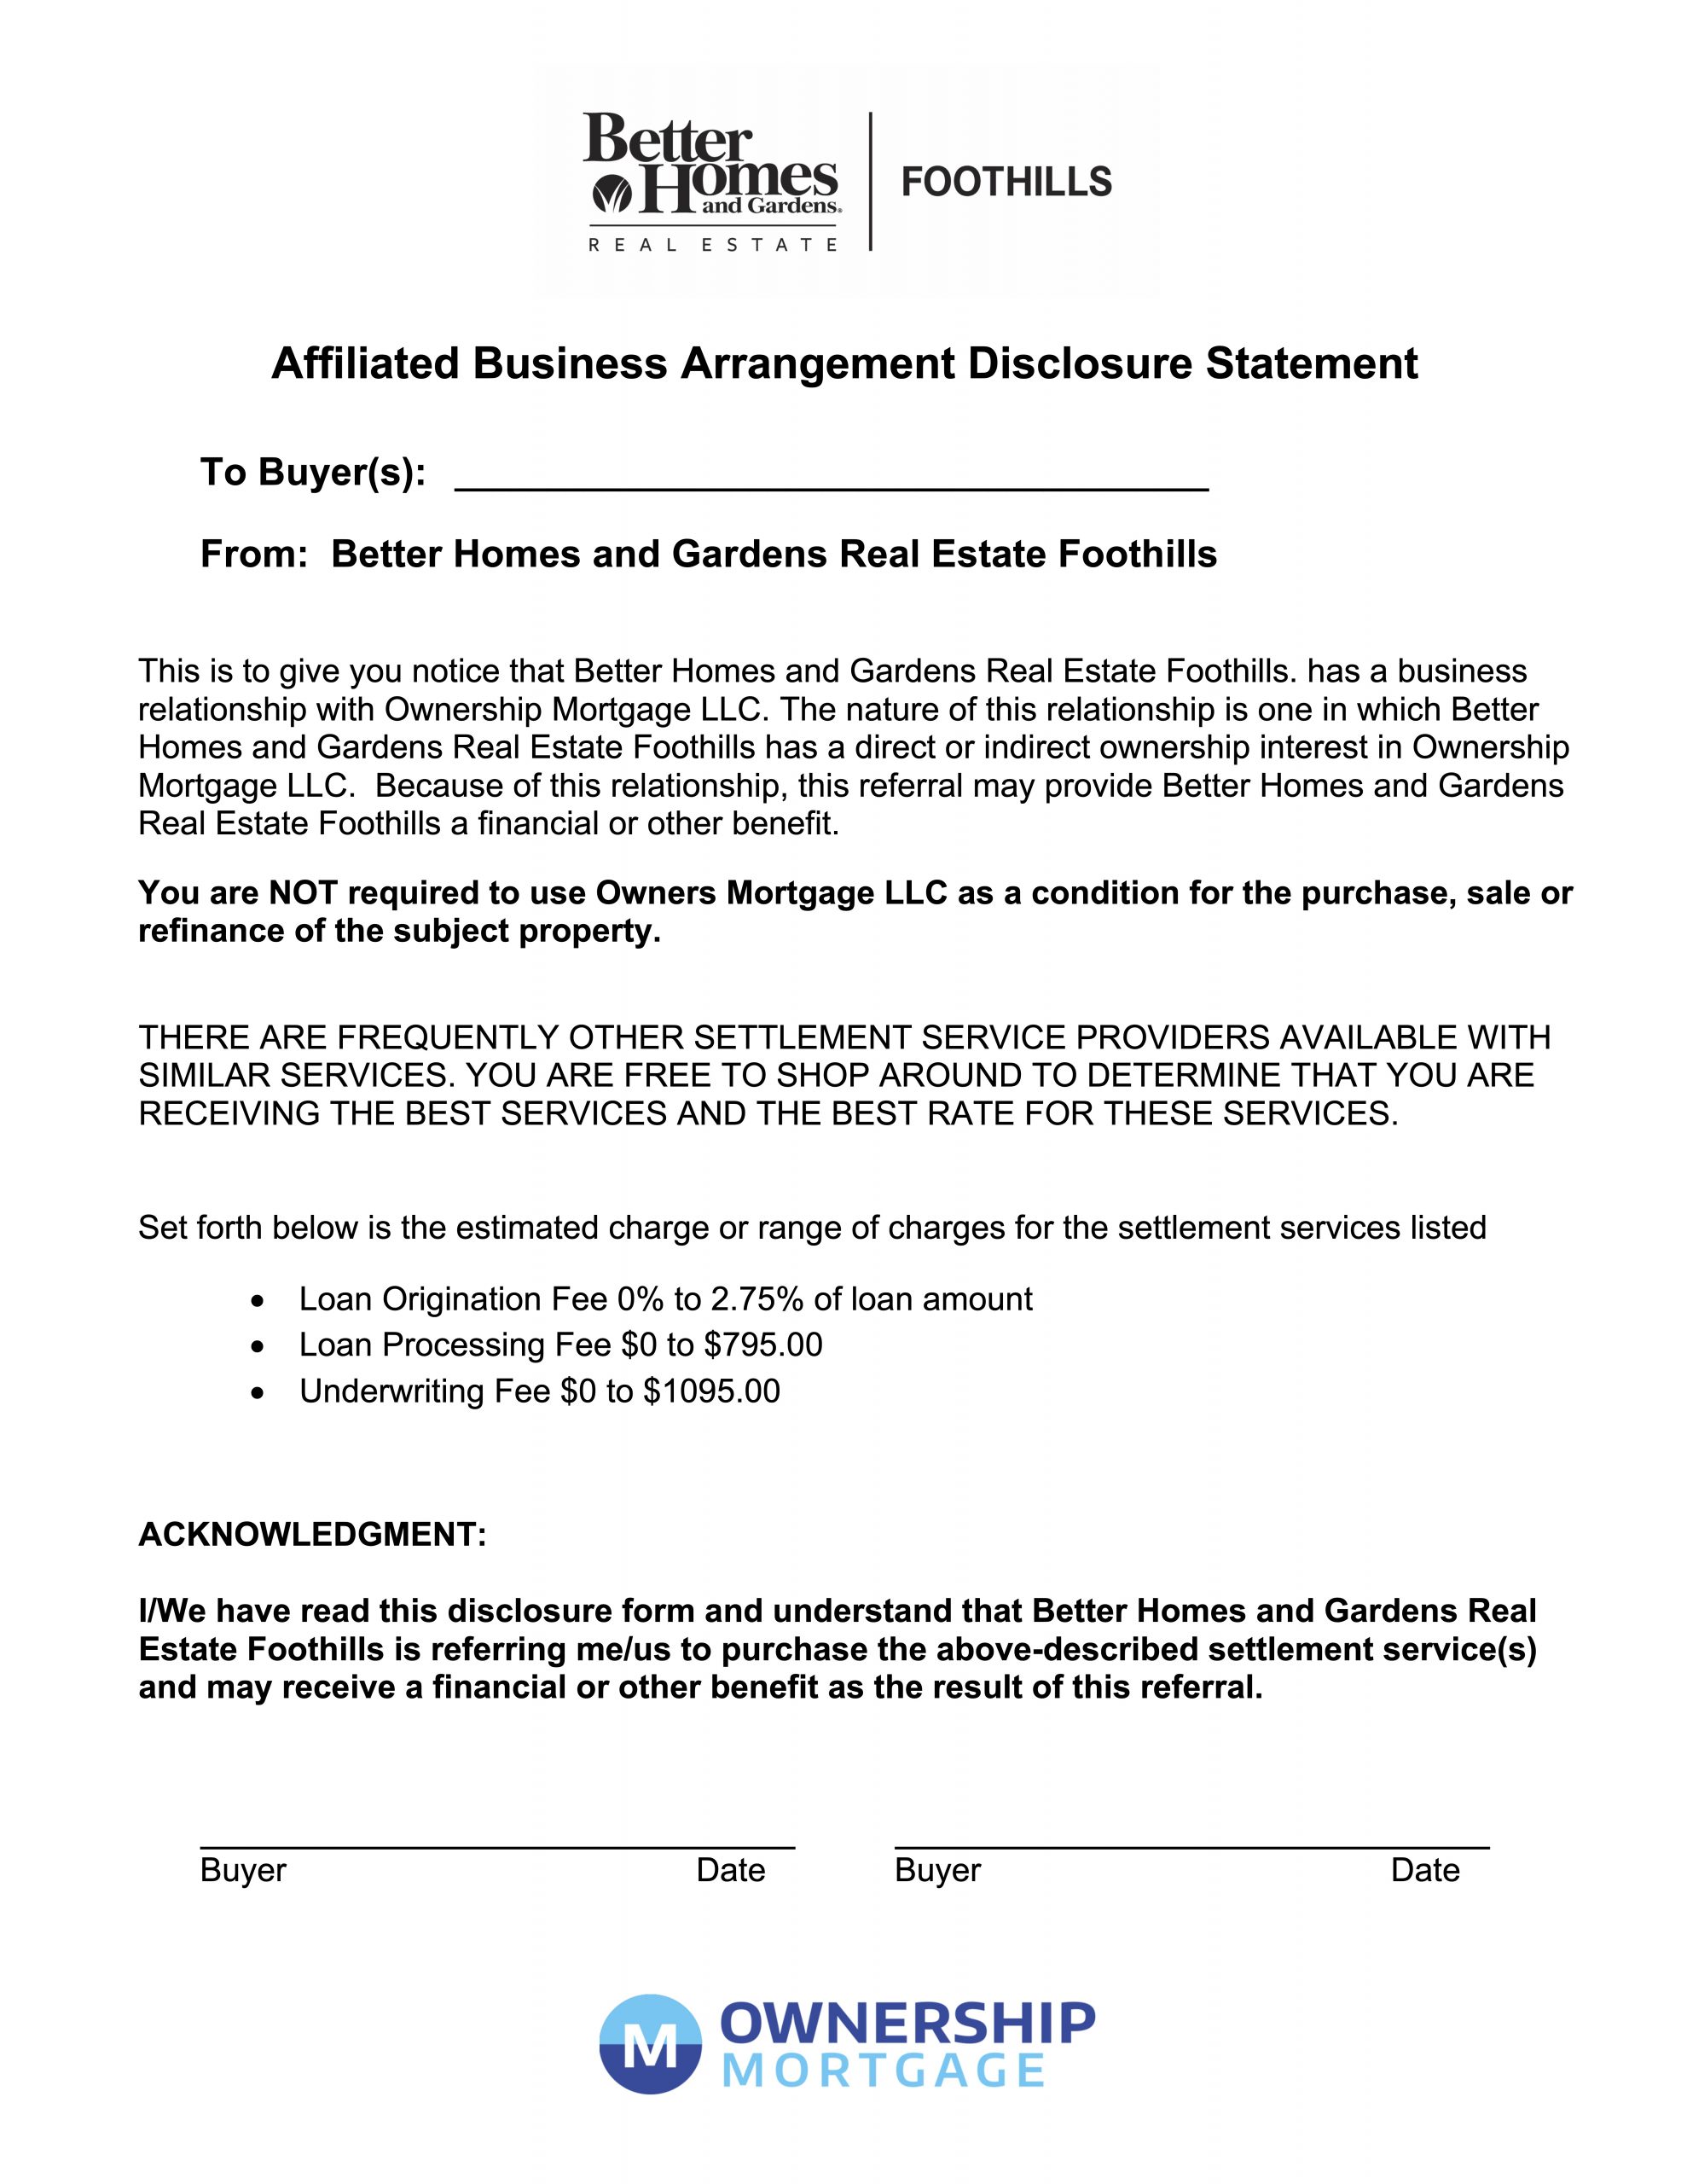 Owners Mortgage Disclosure